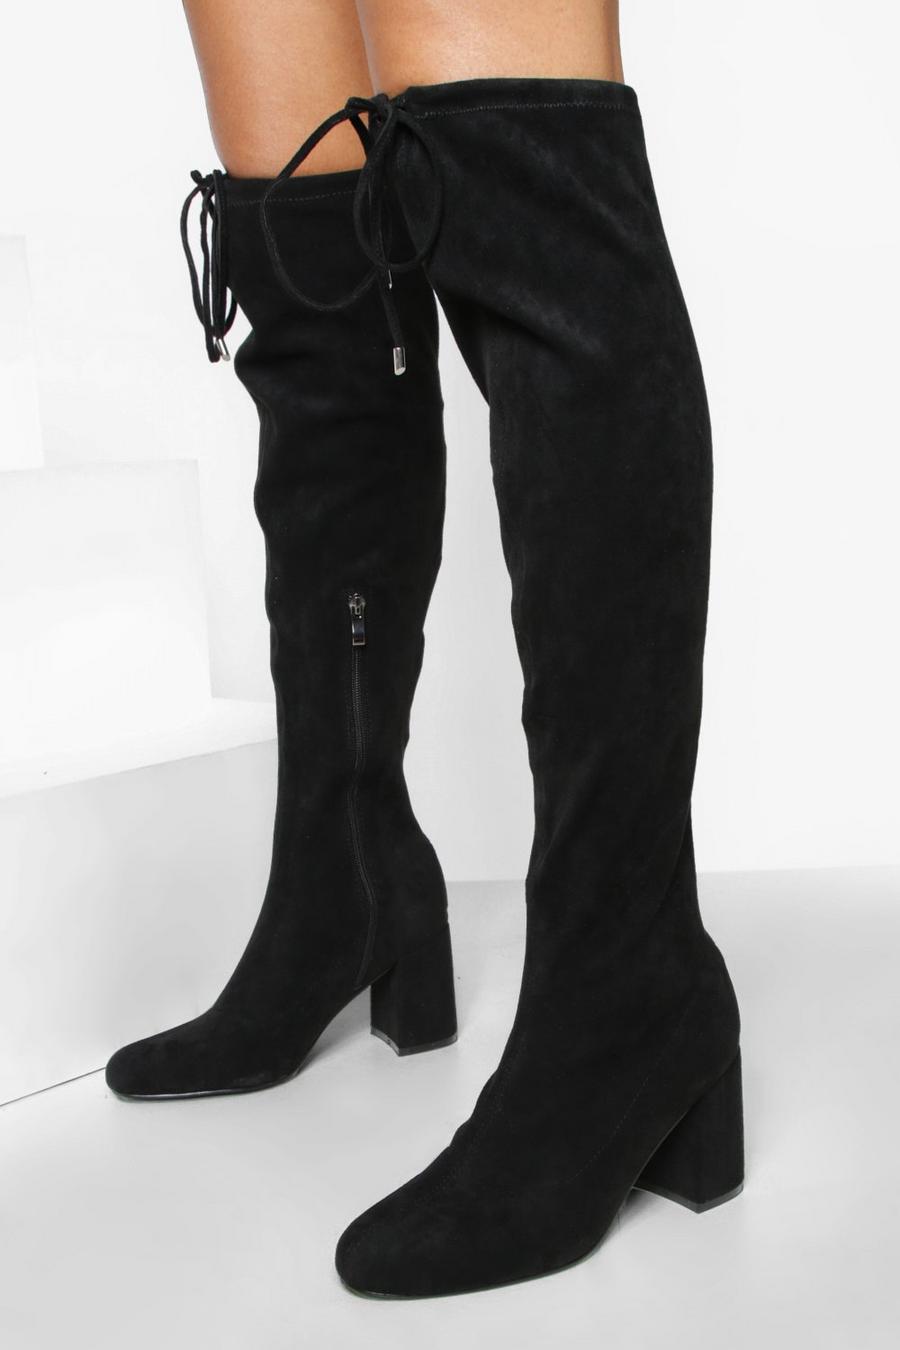 Black Block Heel Stretch Over The Knee Boots image number 1